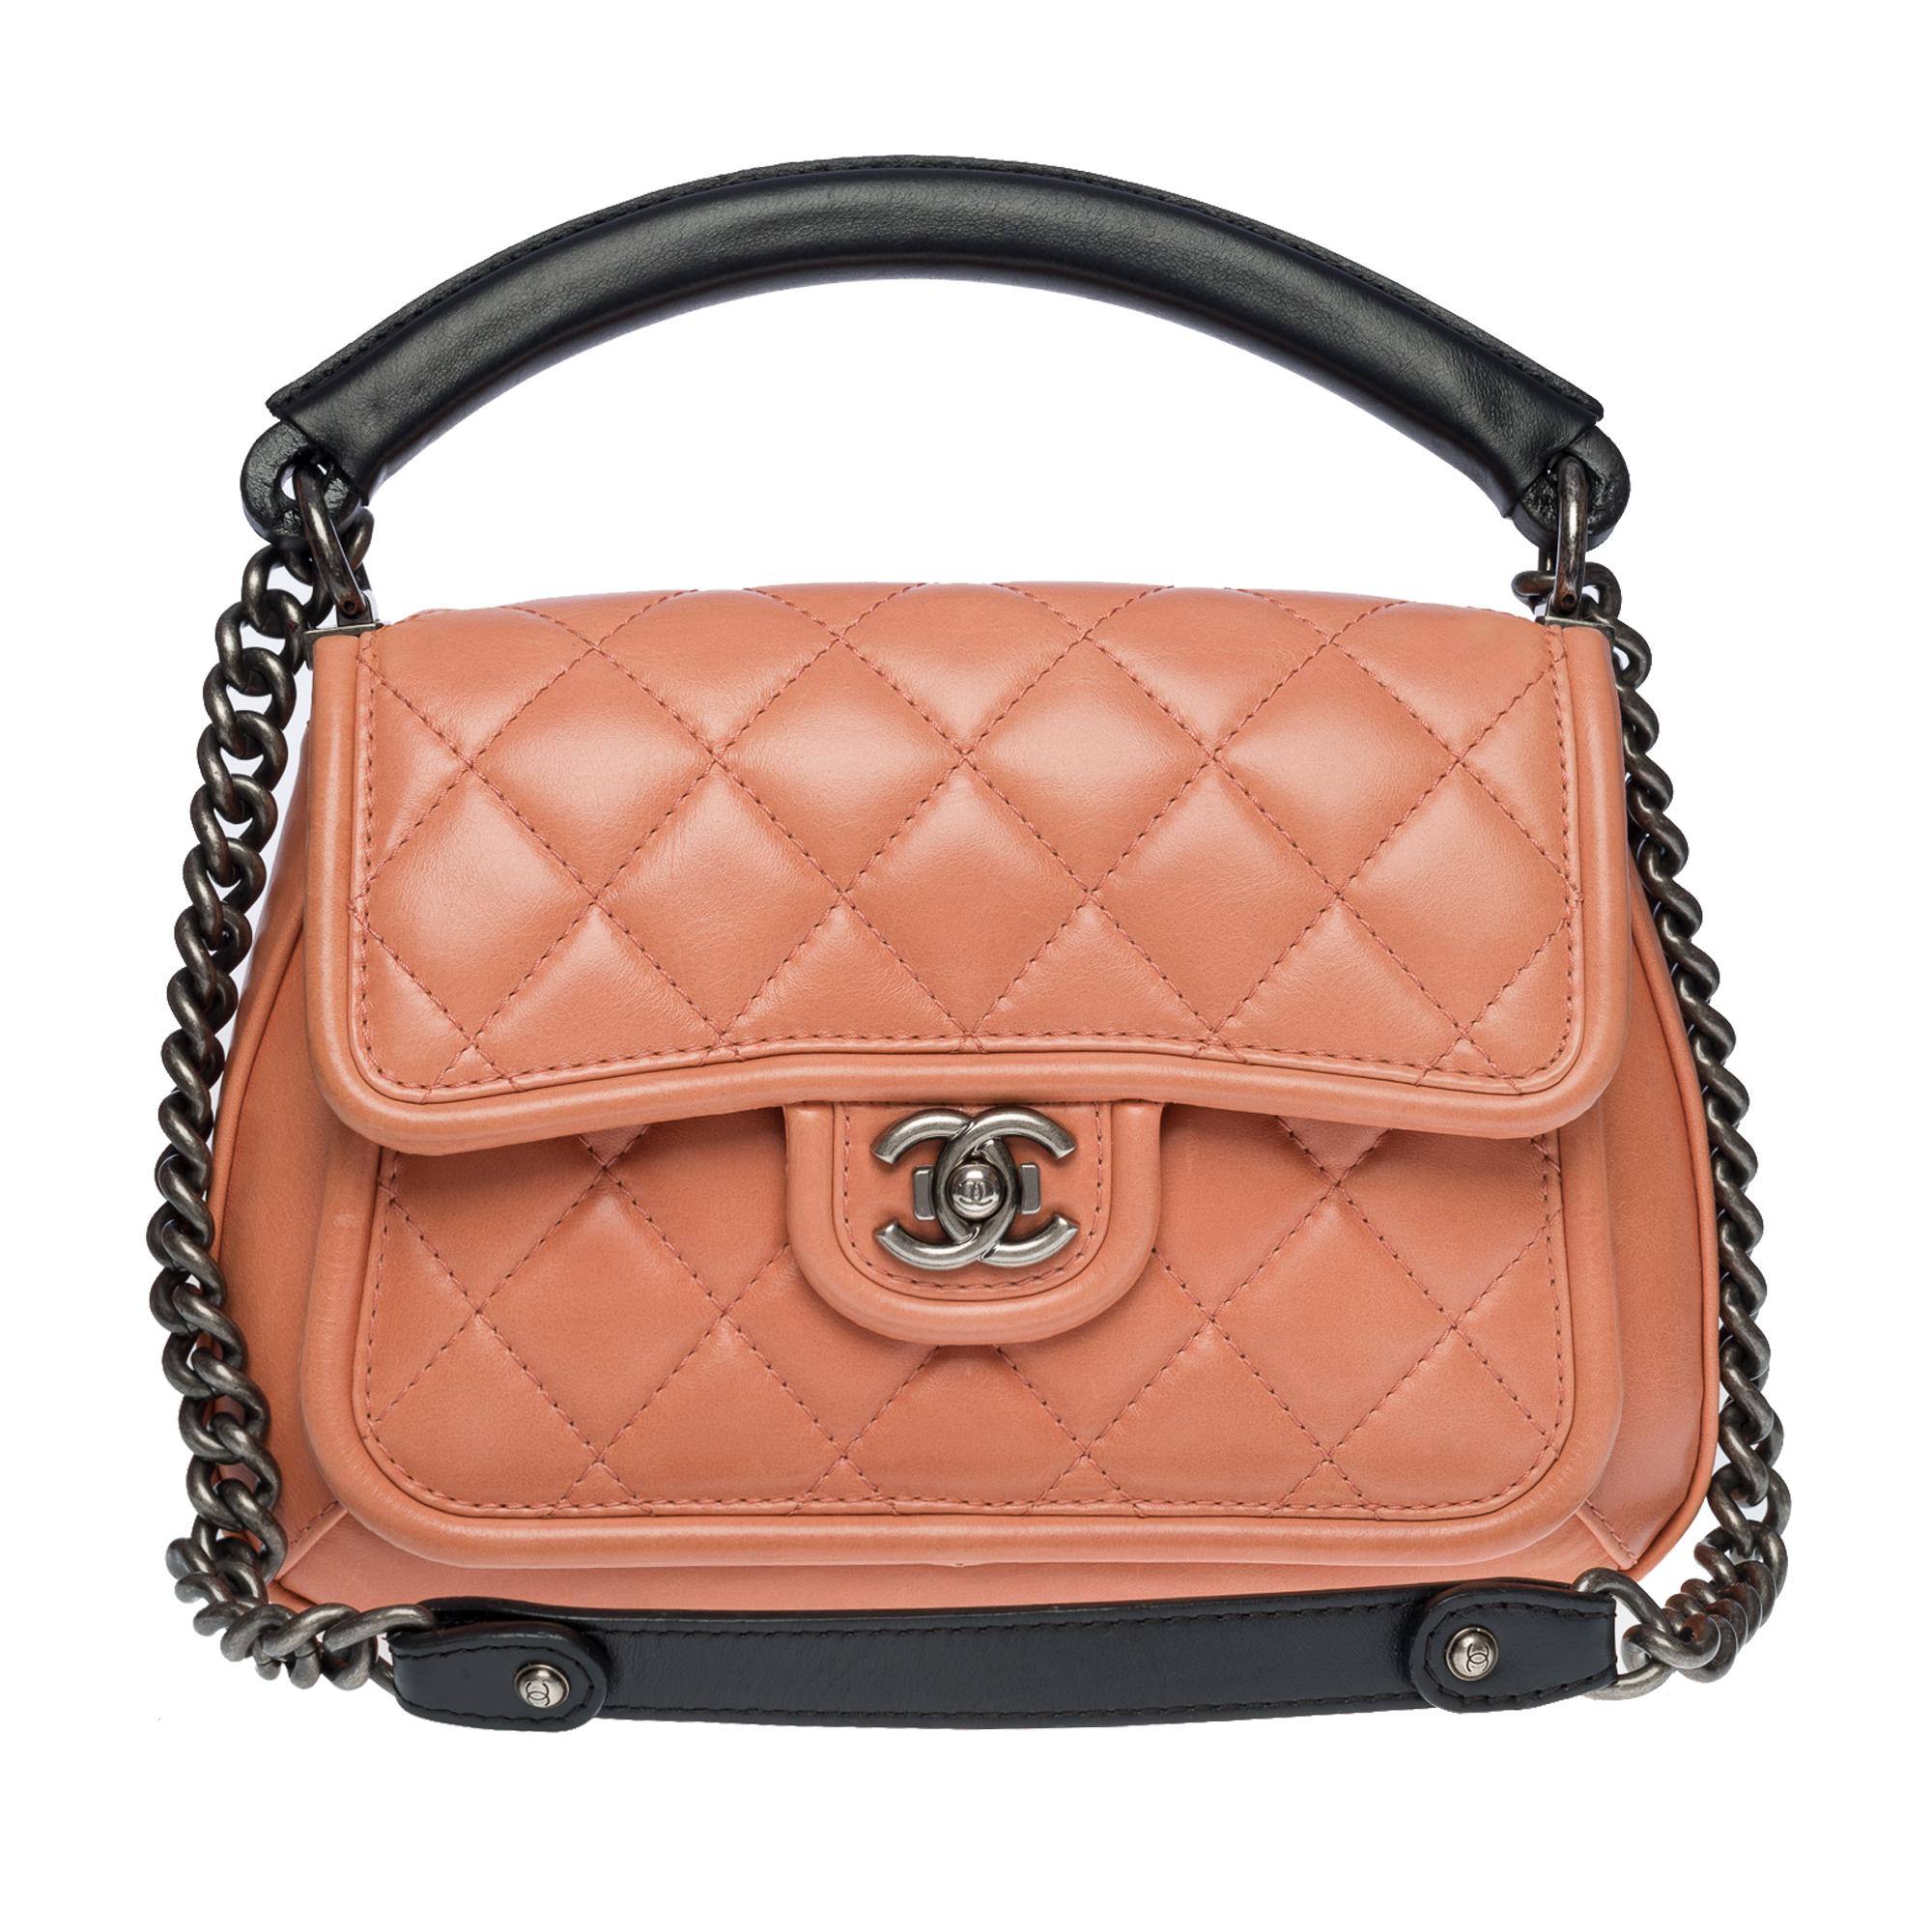 Beautiful Chanel Classic flap bag in pink quilted lambskin, ruthenium metal hardware, a black leather sheathed handle, a ruthenium metal handle allowing a hand and shoulder support

Flap closure, CC clasp in ruthenium metal
Black leather lining, one